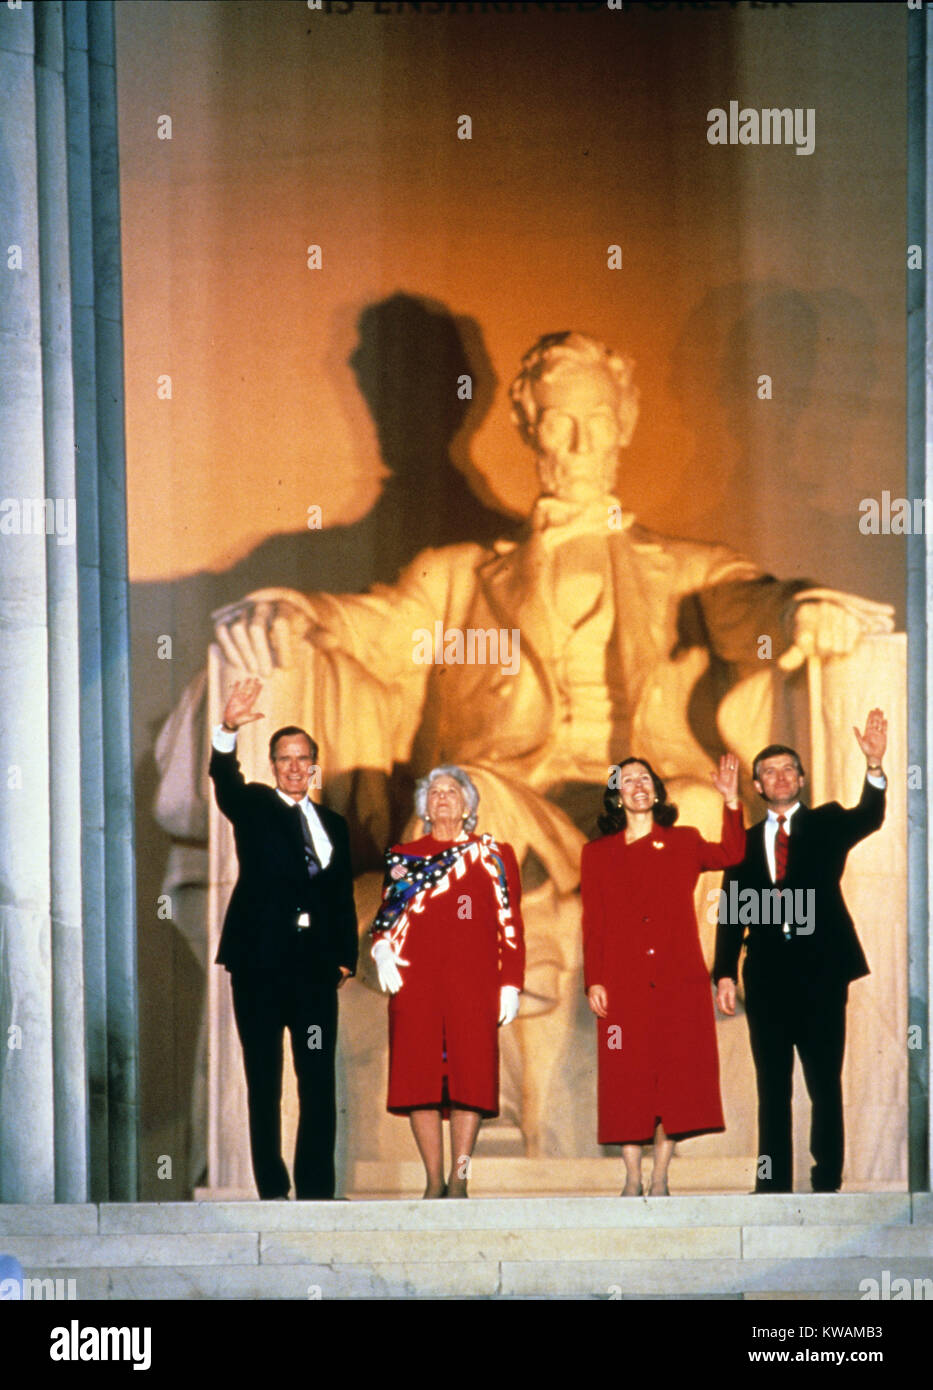 United States President-elect George H.W. Bush attends the opening ceremony for his inauguration at the Lincoln Memorial in Washington, DC on January 18 1989. From left to right: President-elect Bush, Barbara Bush, Marilyn Quayle, and US Vice President-elect Dan Quayle. Credit: Robert Trippett/Pool via CNP - NO WIRE SERVICE - Photo: Robert Trippett/Consolidated/dpa Stock Photo